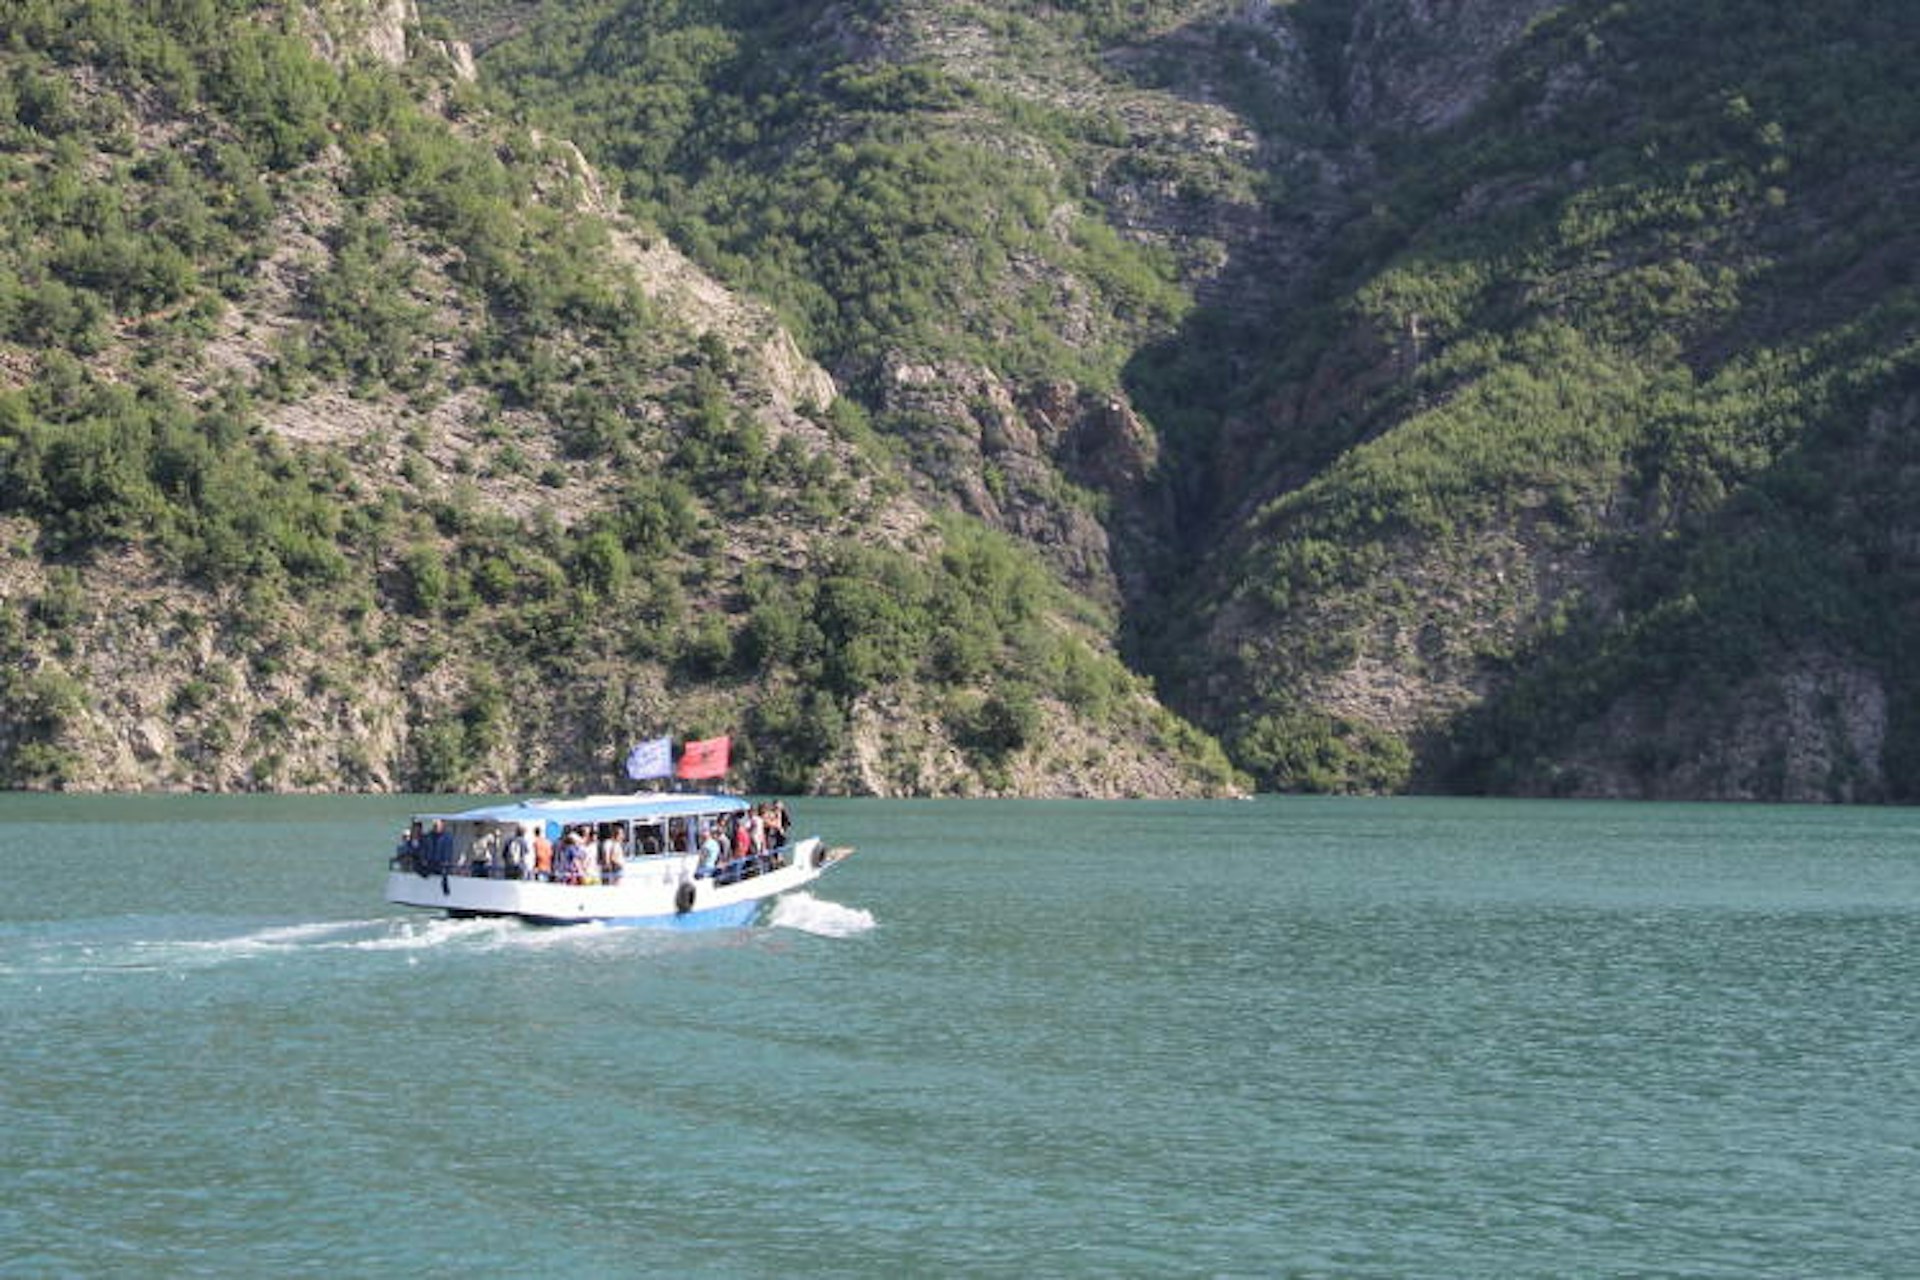 The Dragobia setting out across Lake Koman towards Fierzë. Image by Tom Masters / Lonely Planet